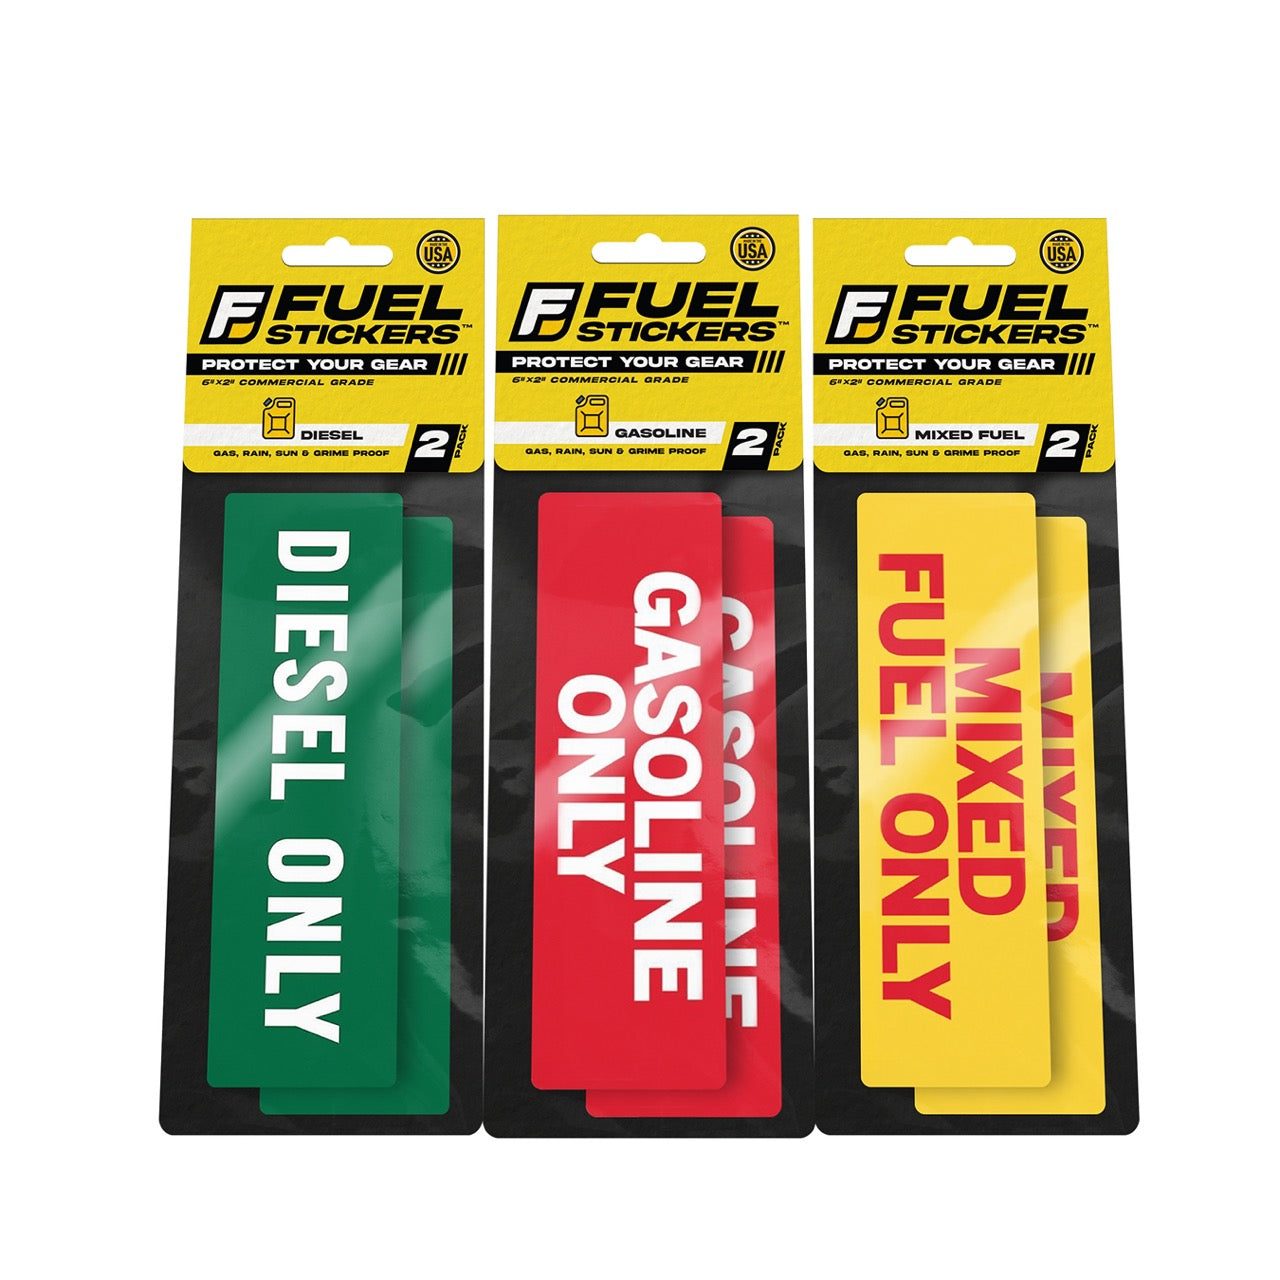 Diesel Only, Gas Only, Mixed Only Sticker - Essential Variety Pack - 2 Label of Each, 6 Total